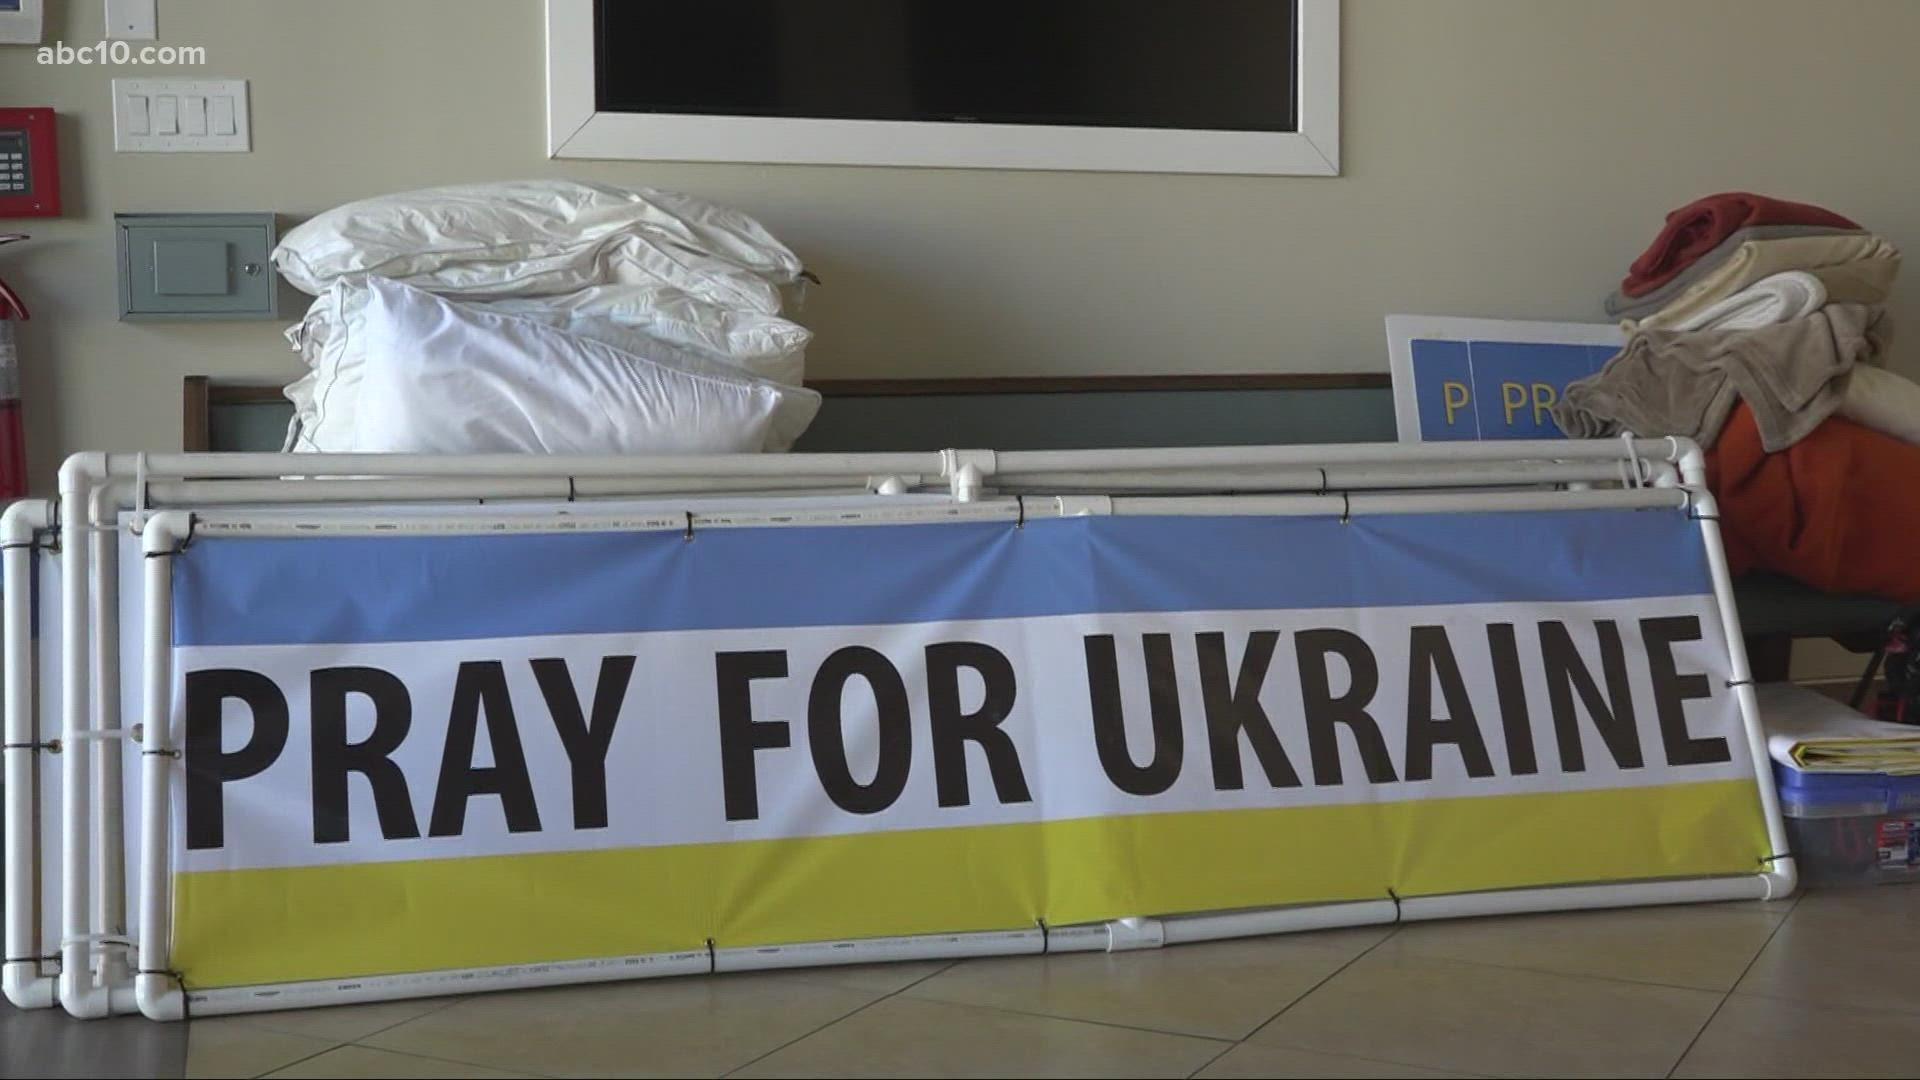 Most of the nearly 100 Ukrainian churches in the area are accepting donations. They say cash can help right away, but many are also collecting food and clothes.